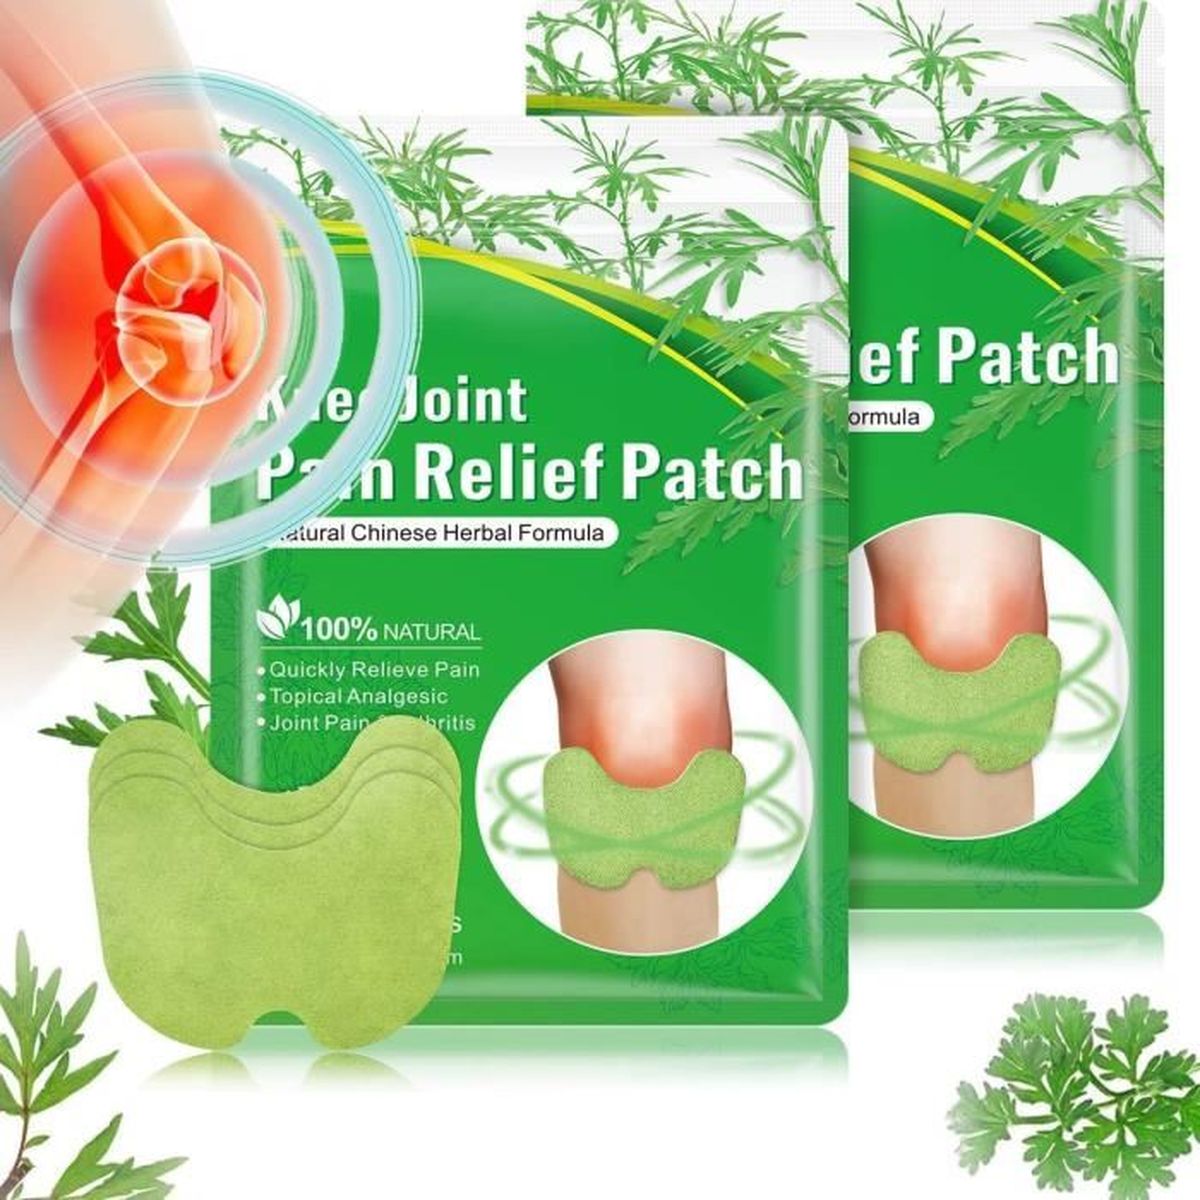 https://www.cdiscount.com/pdt2/9/7/6/1/1200x1200/auc6920413991976/rw/24pcs-natural-knee-pain-patches-herbal-knee-patch.jpg